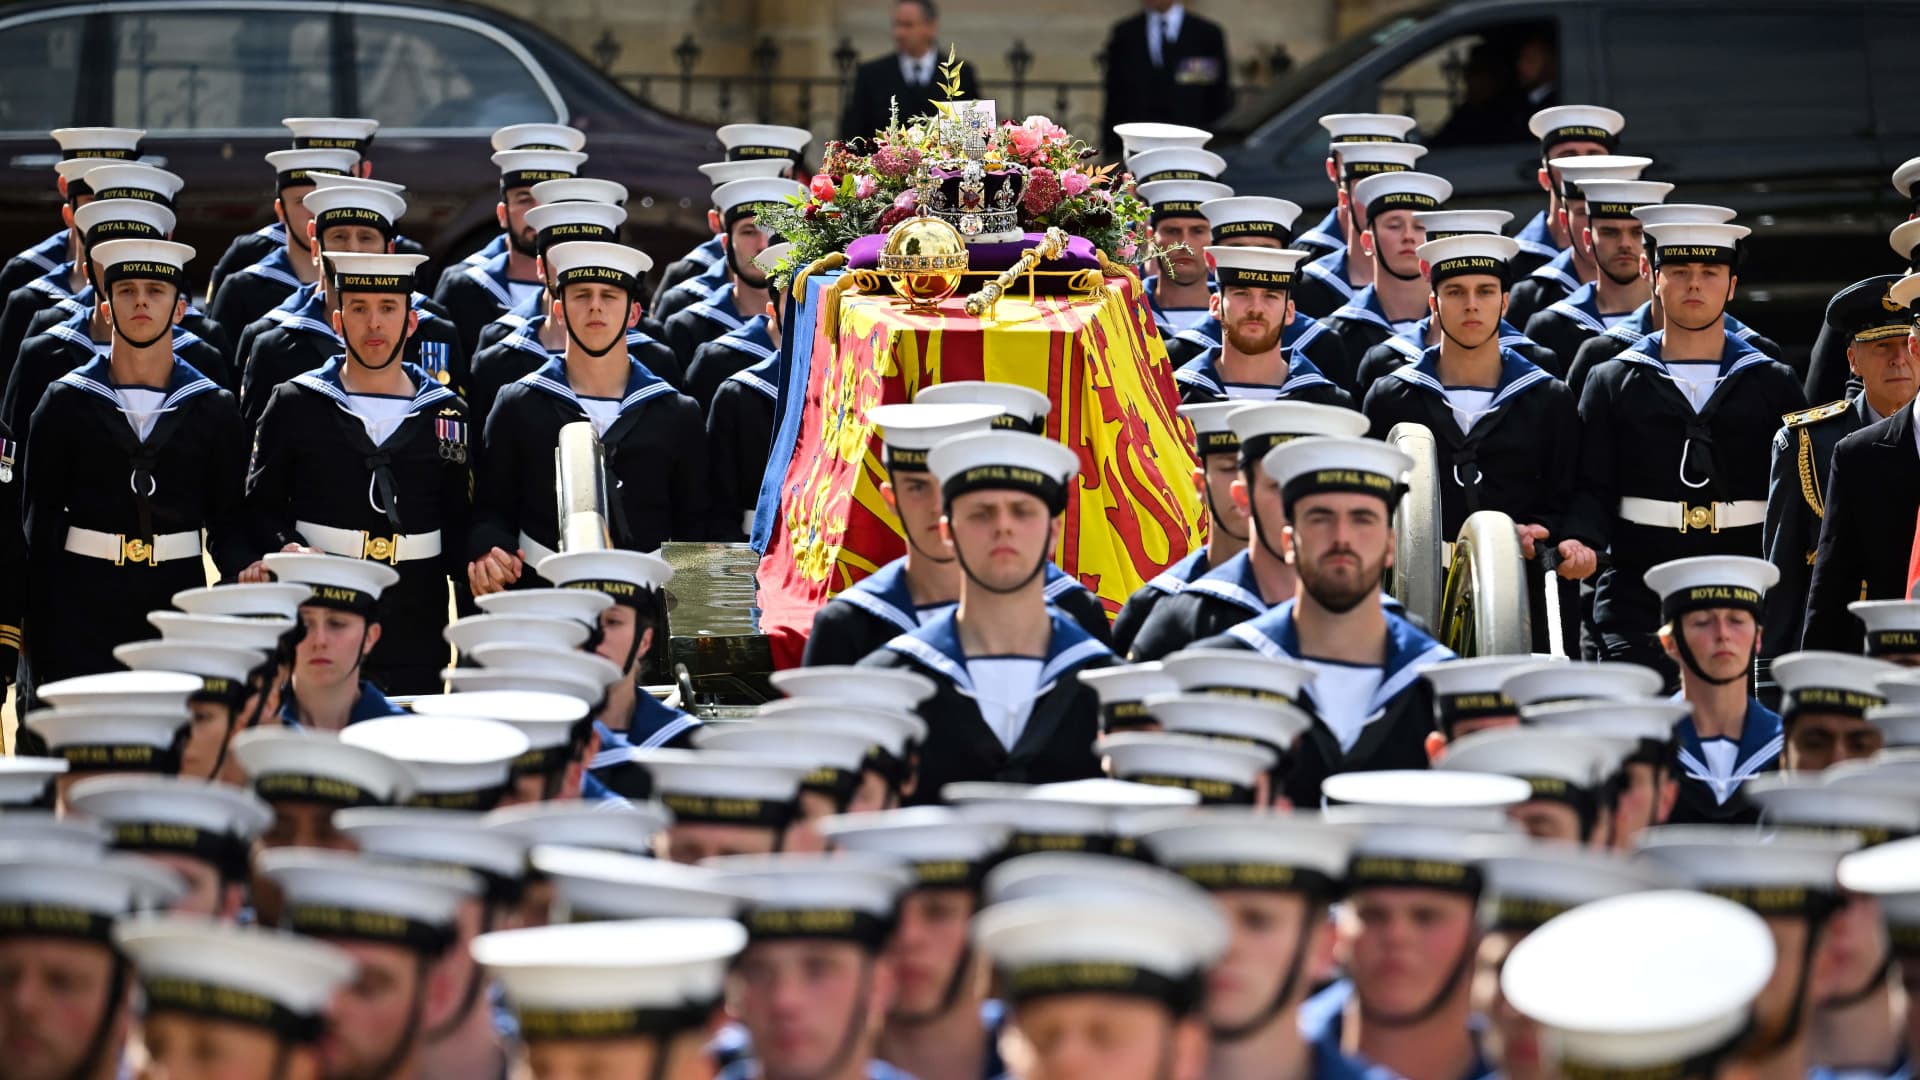 Royal Navy Sailors walk ahead and behind the coffin of Queen Elizabeth II, draped in the Royal Standard, as it travels on the State Gun Carriage of the Royal Navy from Westminster Abbey to Wellington Arch in London on September 19, 2022, after the State Funeral Service of Britain's Queen Elizabeth II.